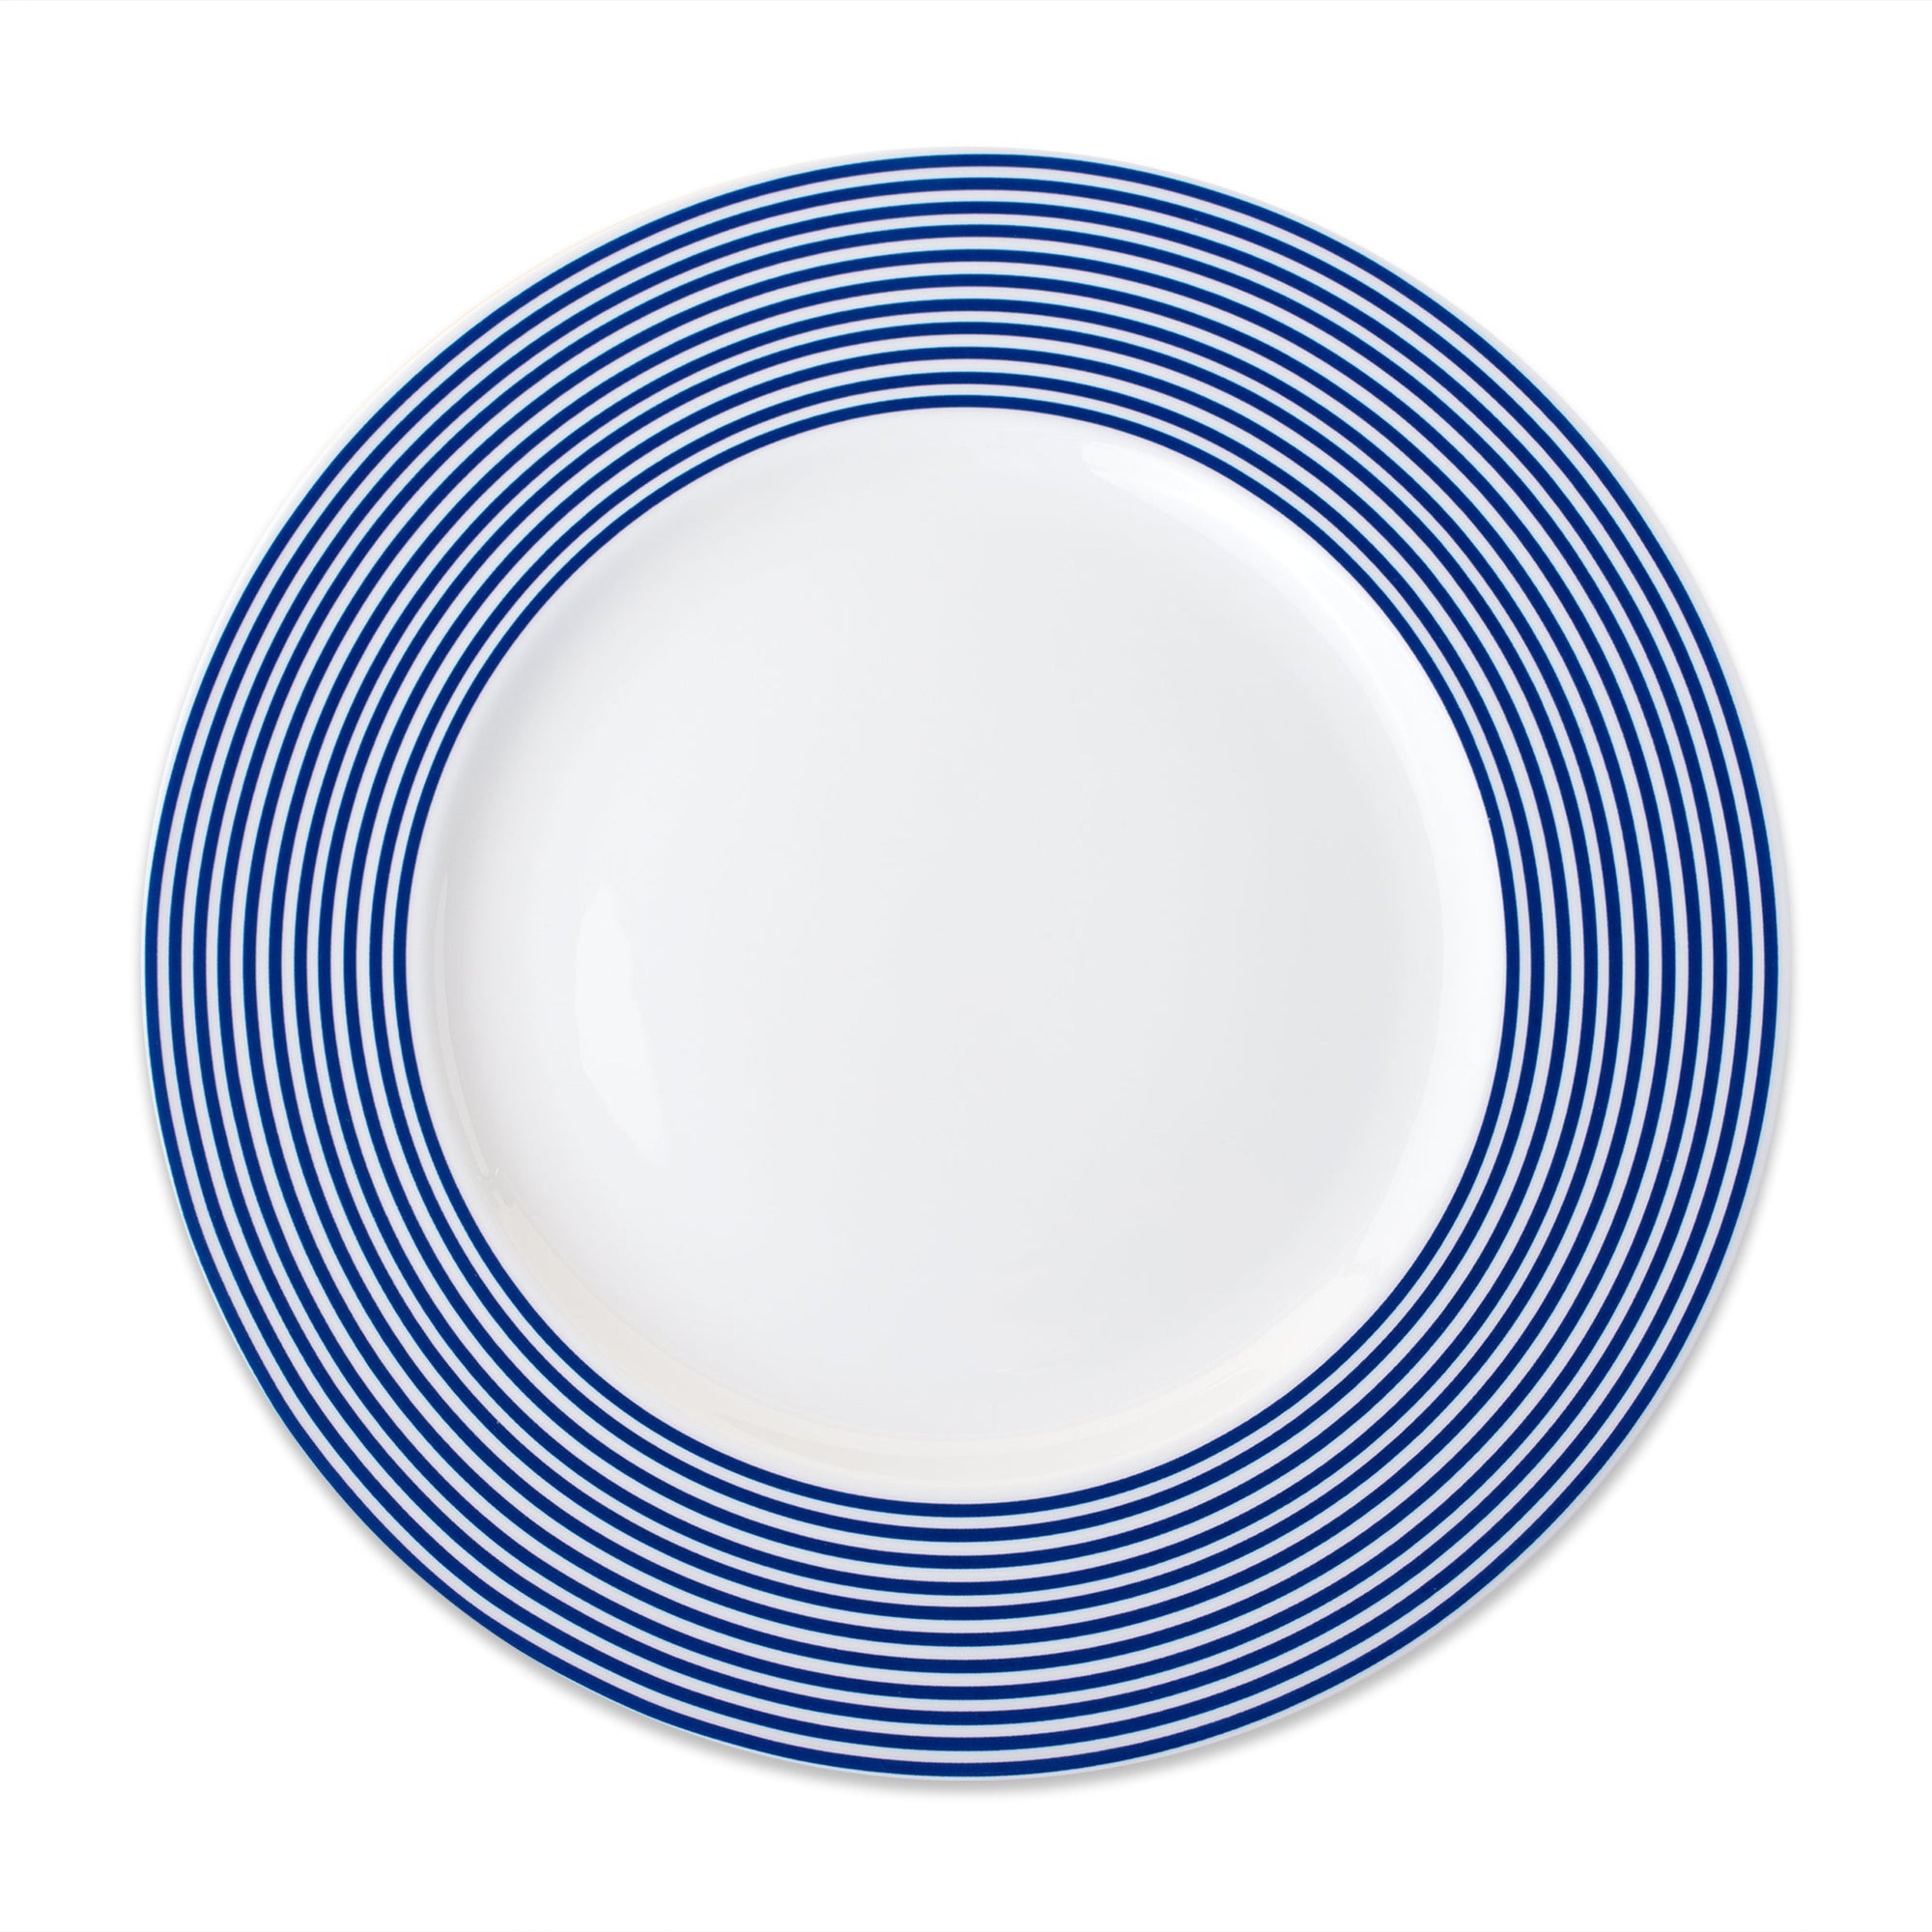 A white Newport Stripe Rimmed Dinner Plate by Caskata Artisanal Home with concentric blue circles around the edge, perfect for contemporary dinnerware collections.